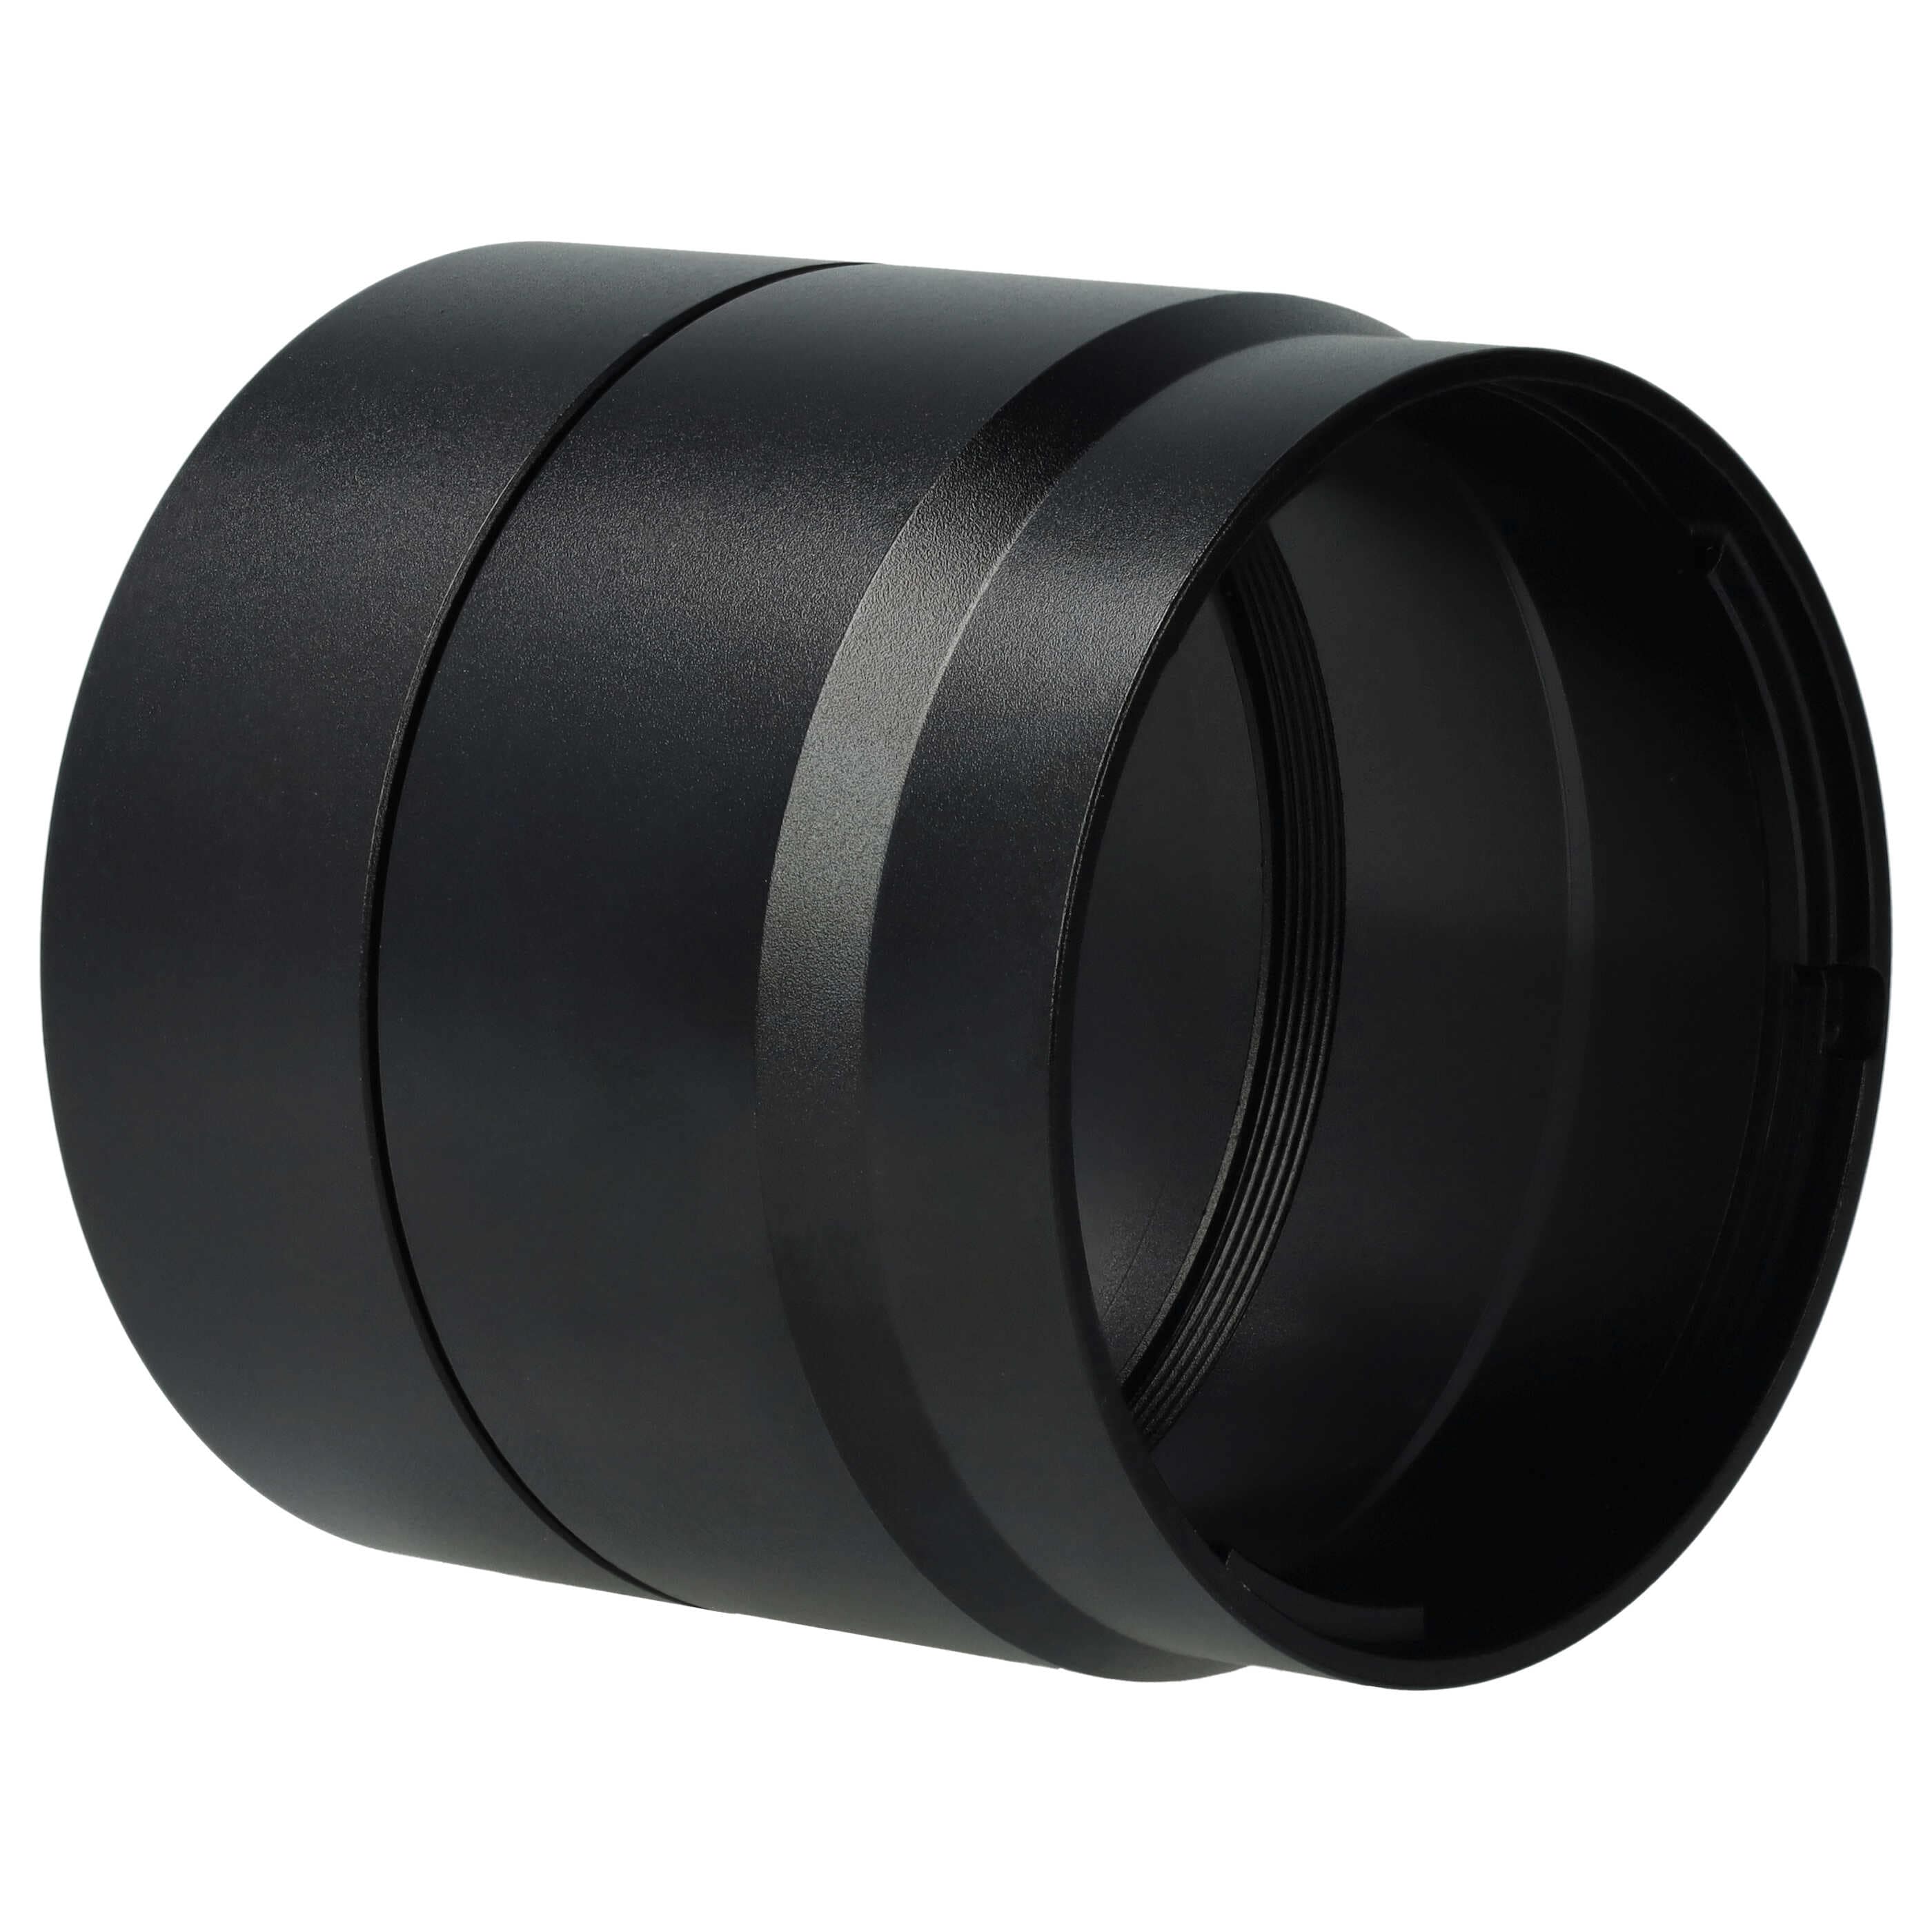 58 mm Filter Adapter, Tubular suitable for Canon PowerShot G10, G11, G12 Camera Lens